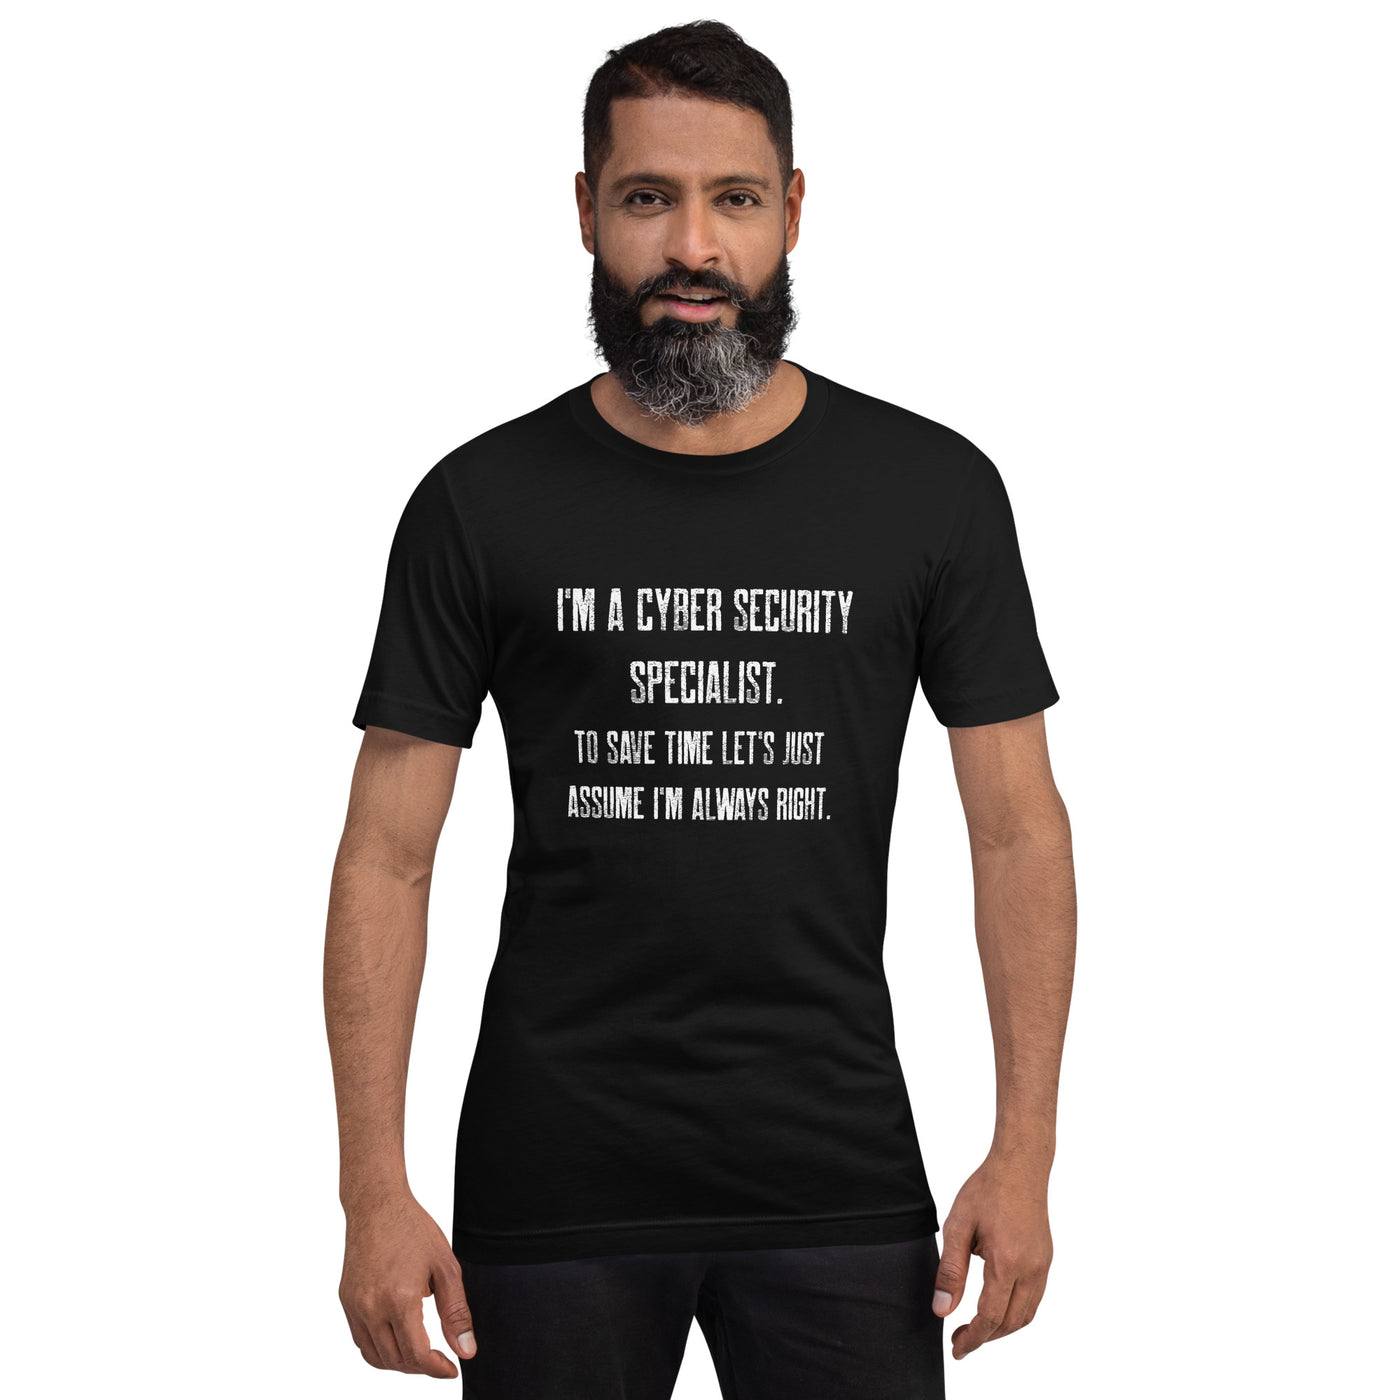 I am a Cyber Security Specialist Unisex t-shirt